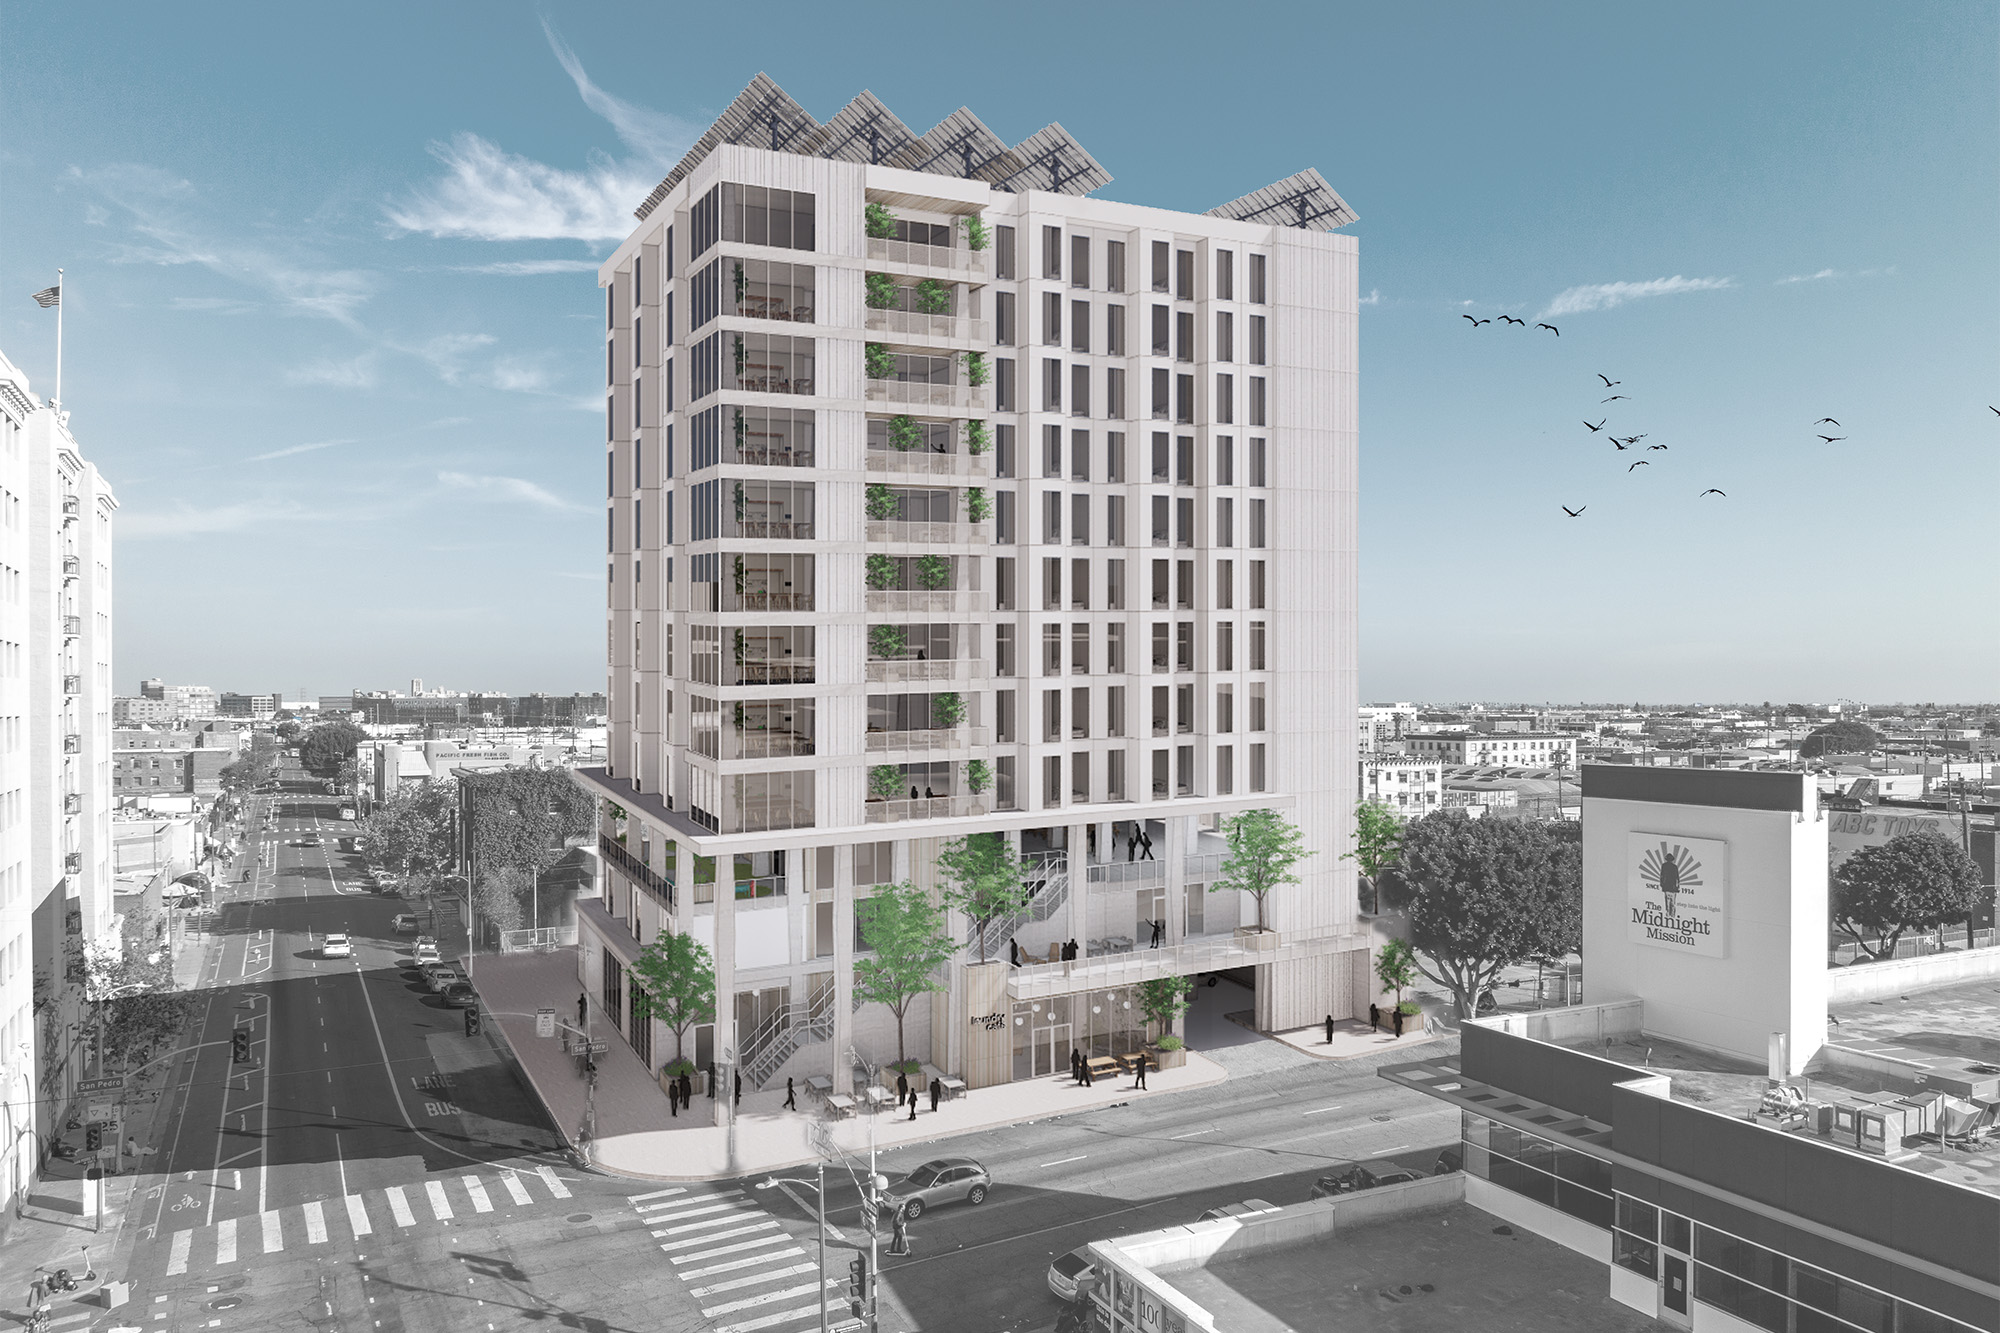 Exterior concept of supportive housing development on Skid Row